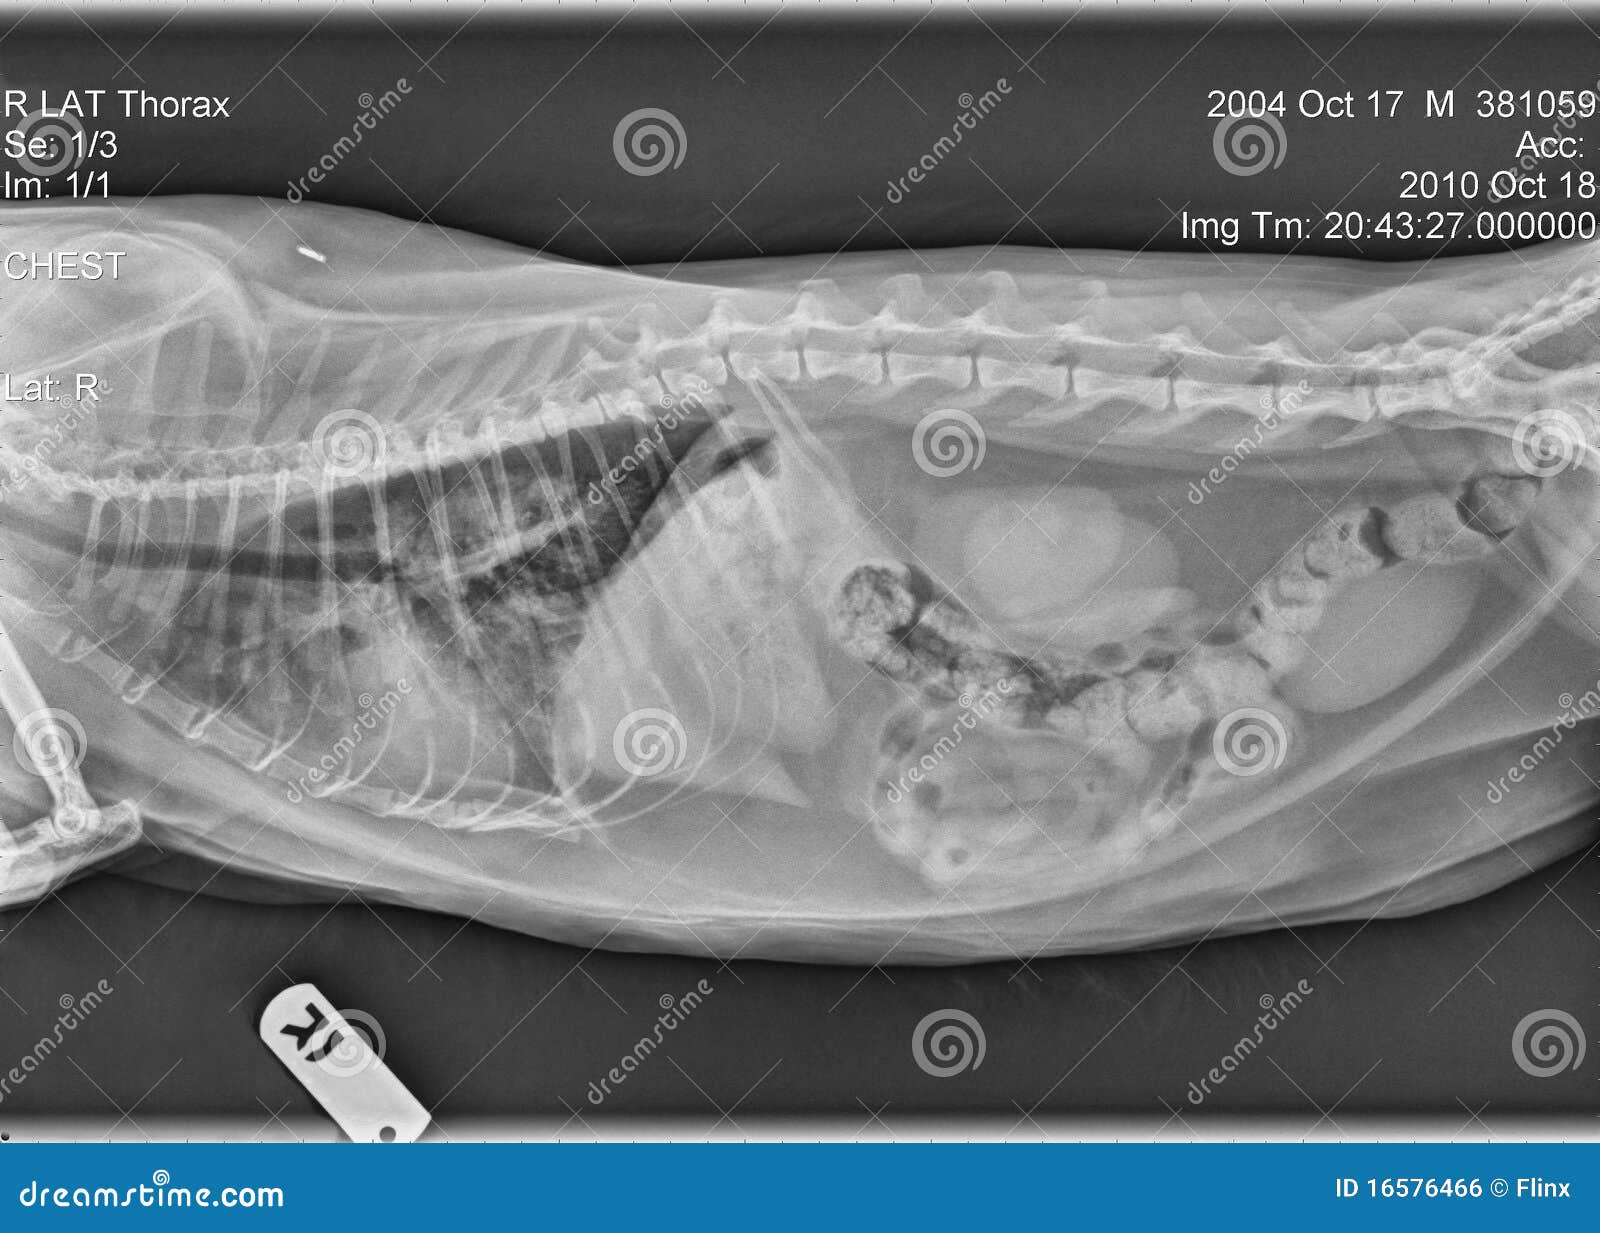 cat right lateral thorax x-ray